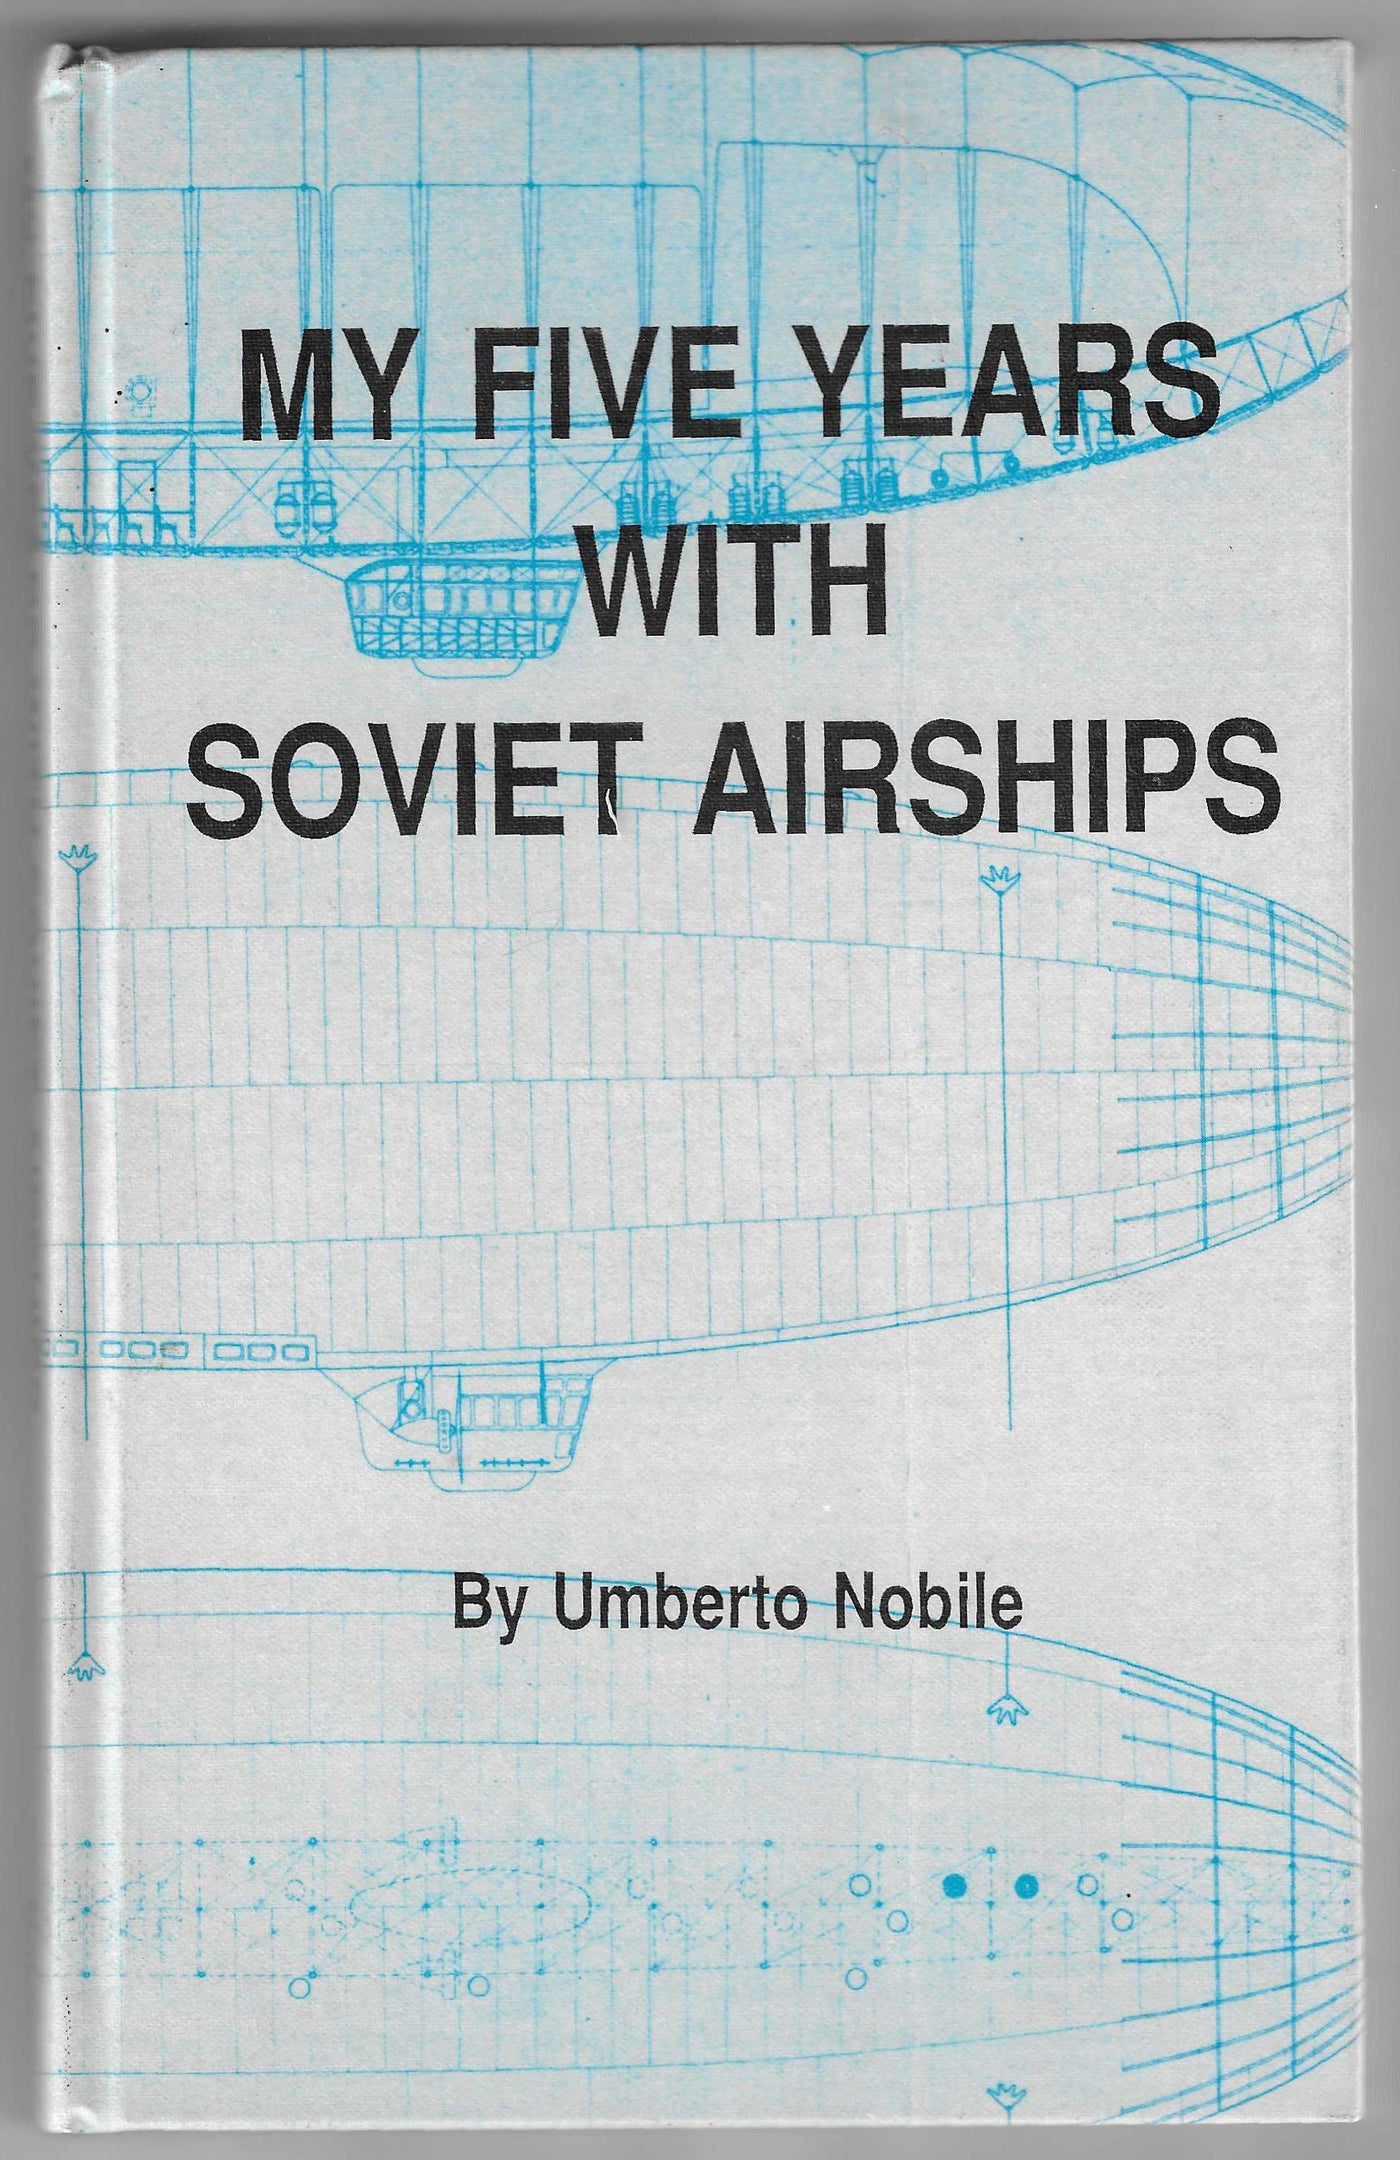 My Five Years With Soviet Airships by Umberto Nobile